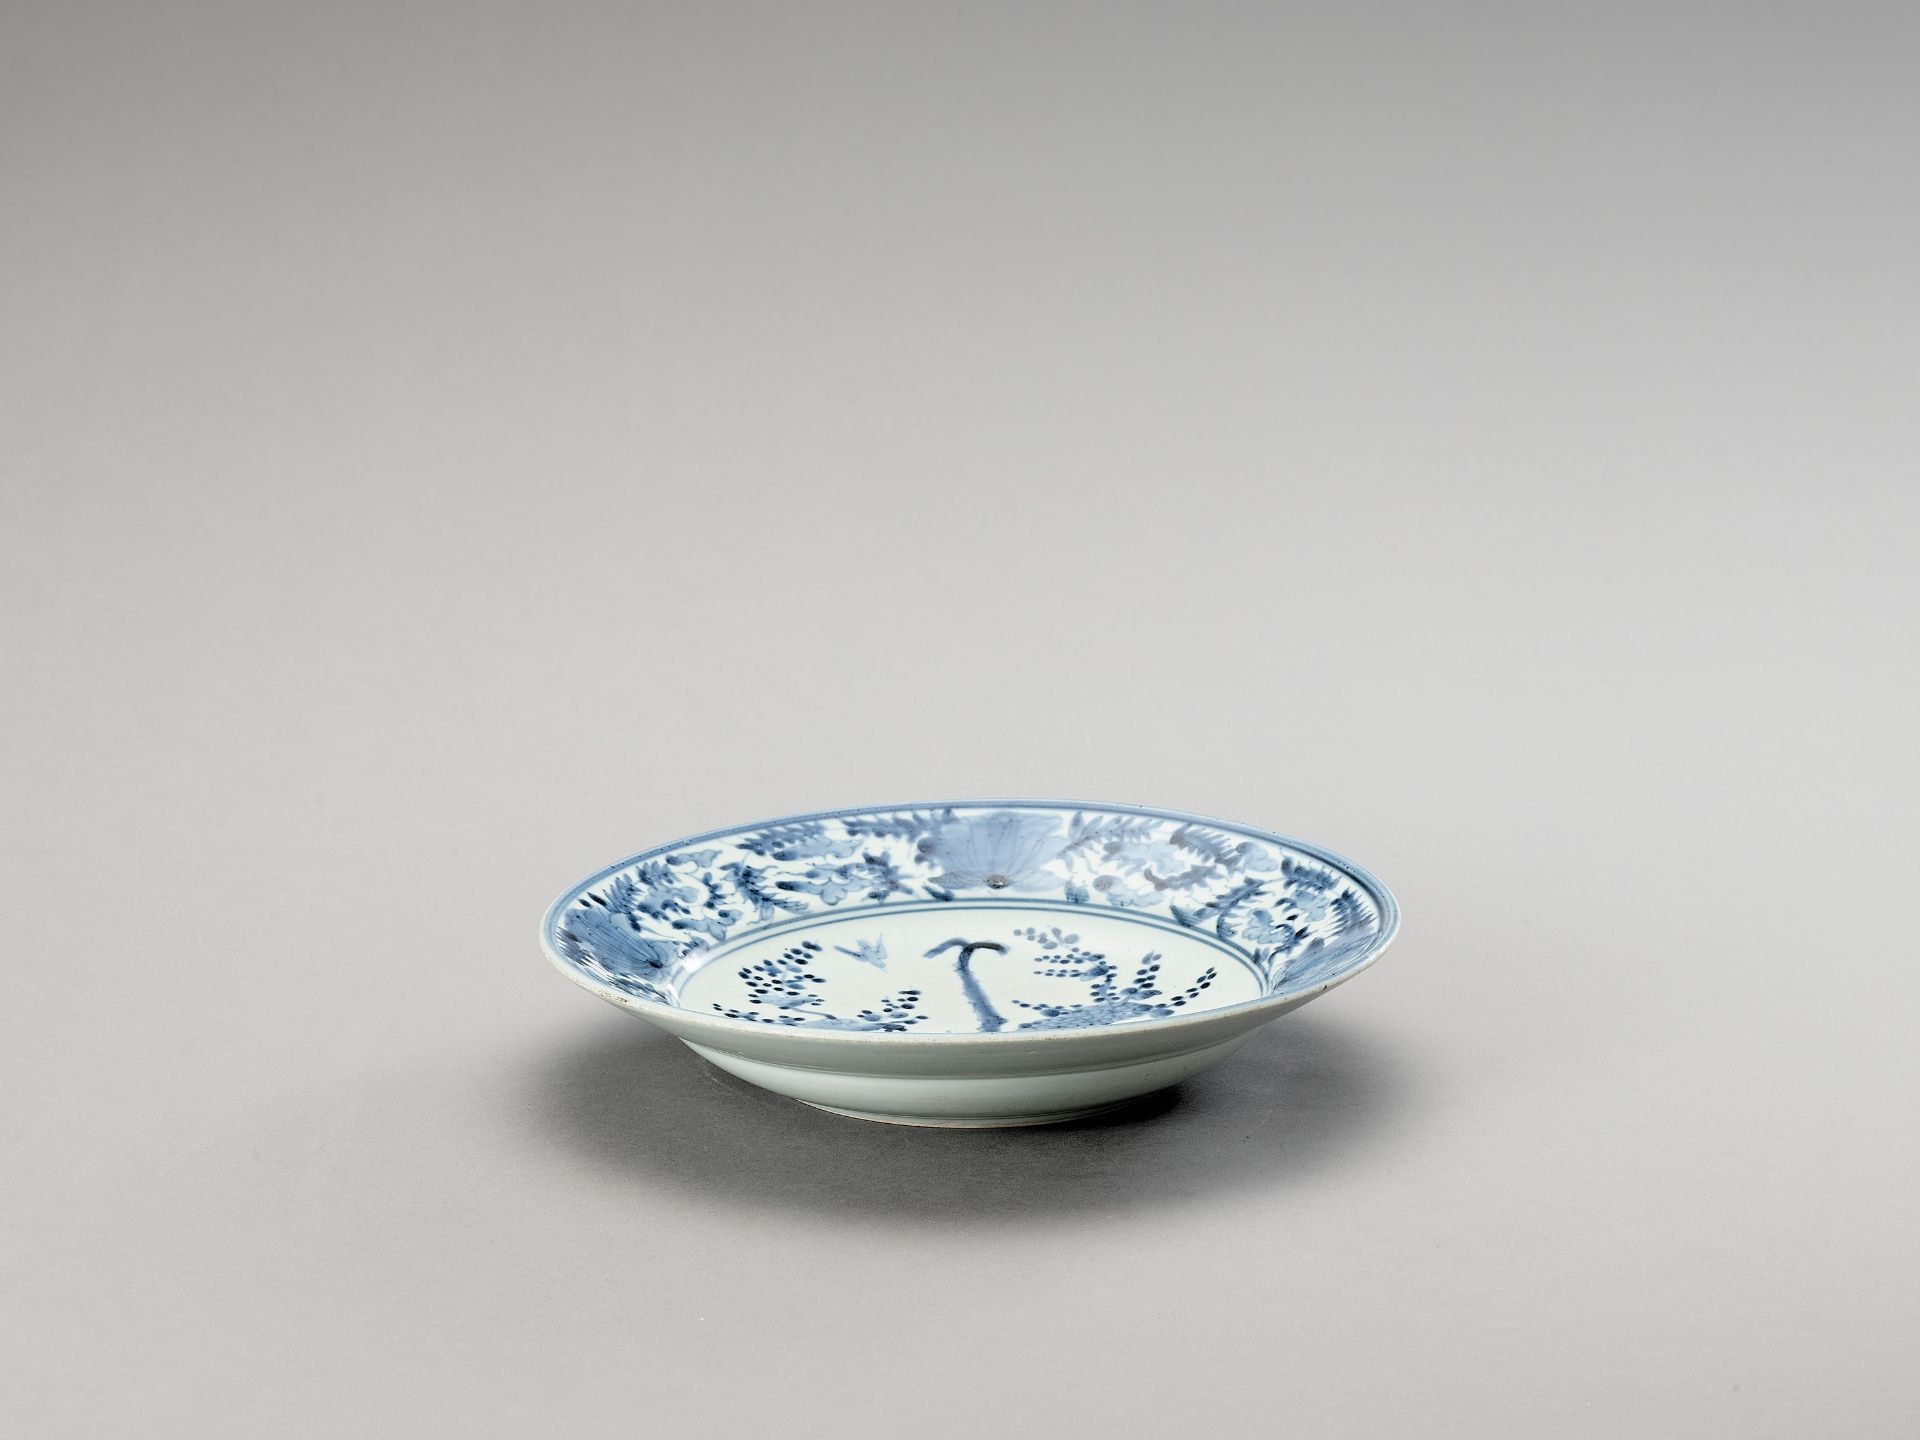 A 'KRAAK' STYLE BLUE AND WHITE PORCELAIN DISH - Image 2 of 4